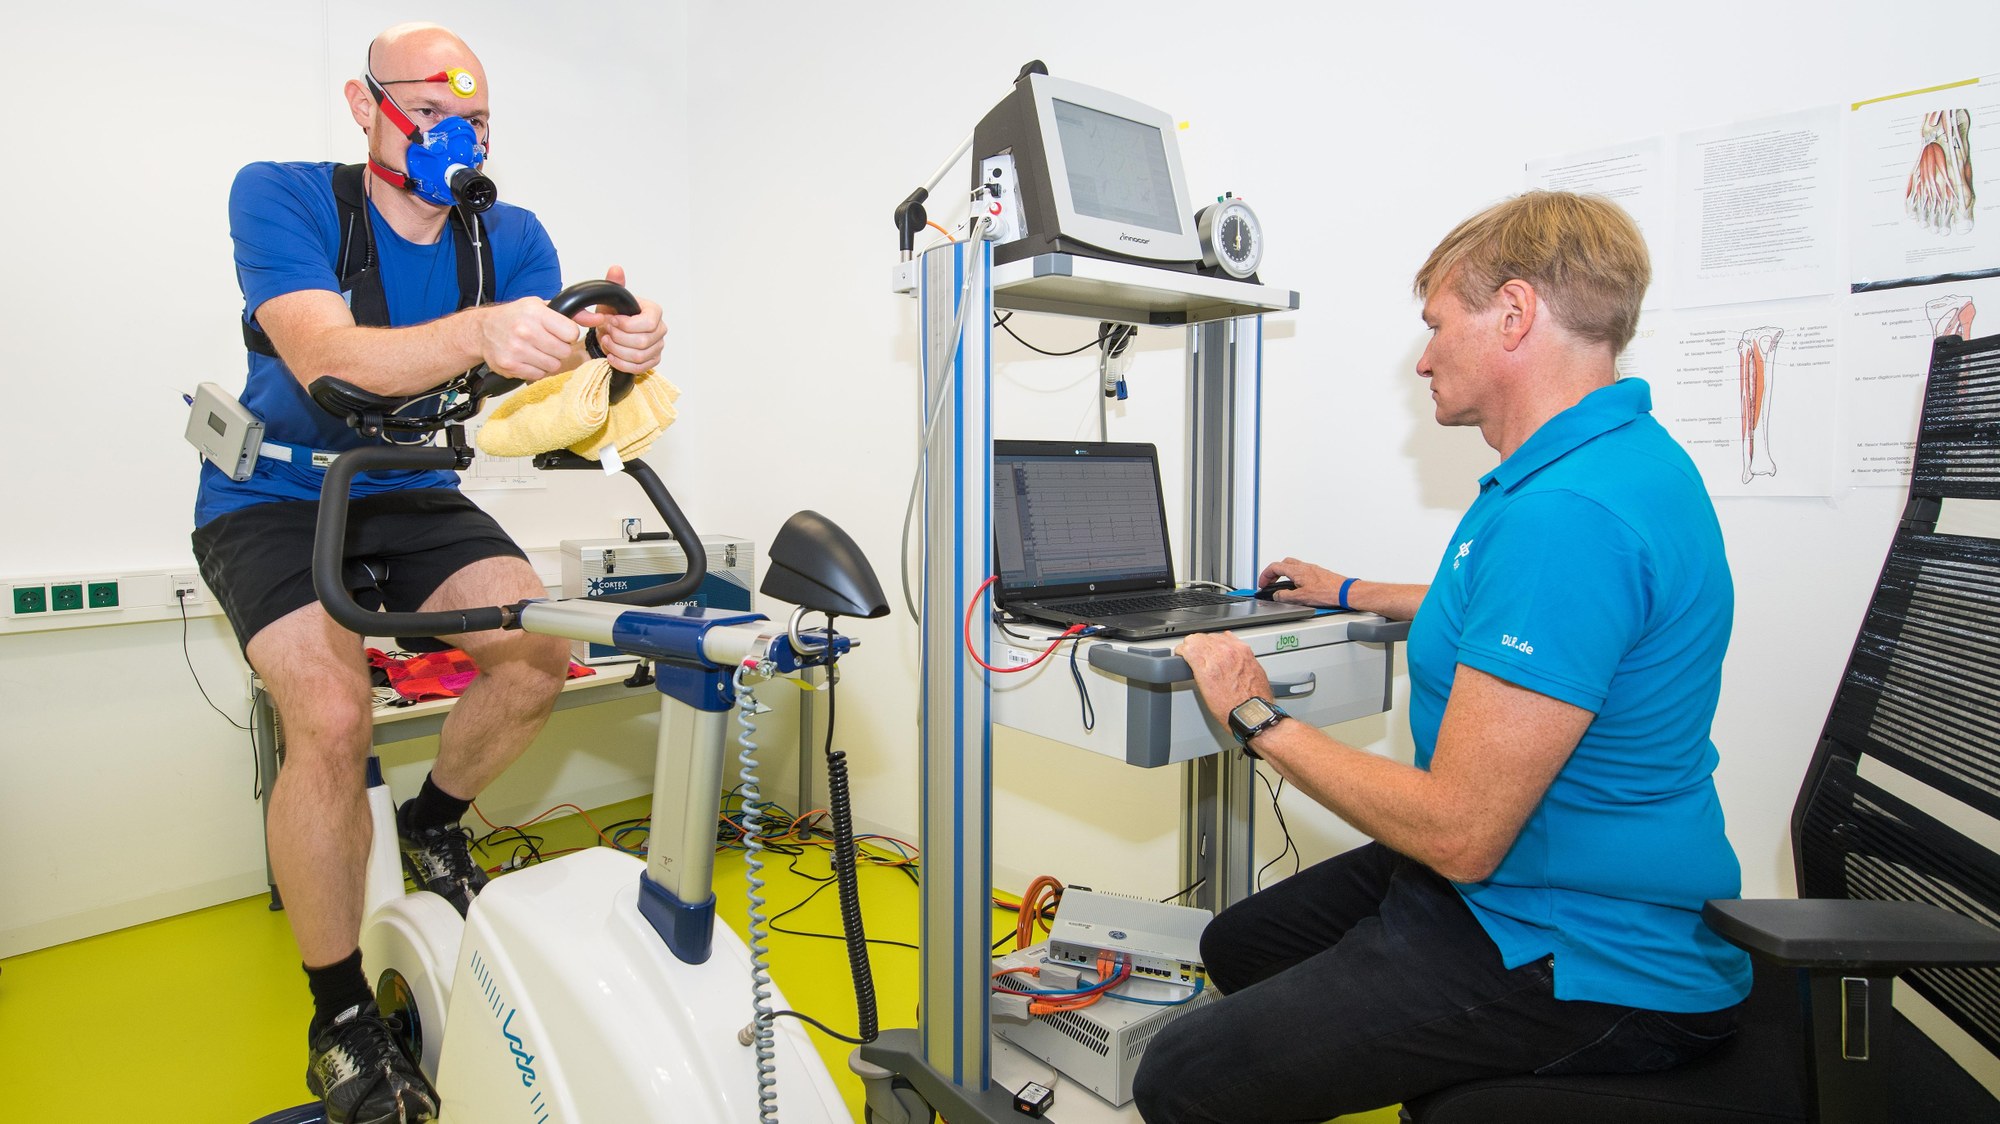 Alexander Gerst training with MetabolicSpace and SPACETEX-2